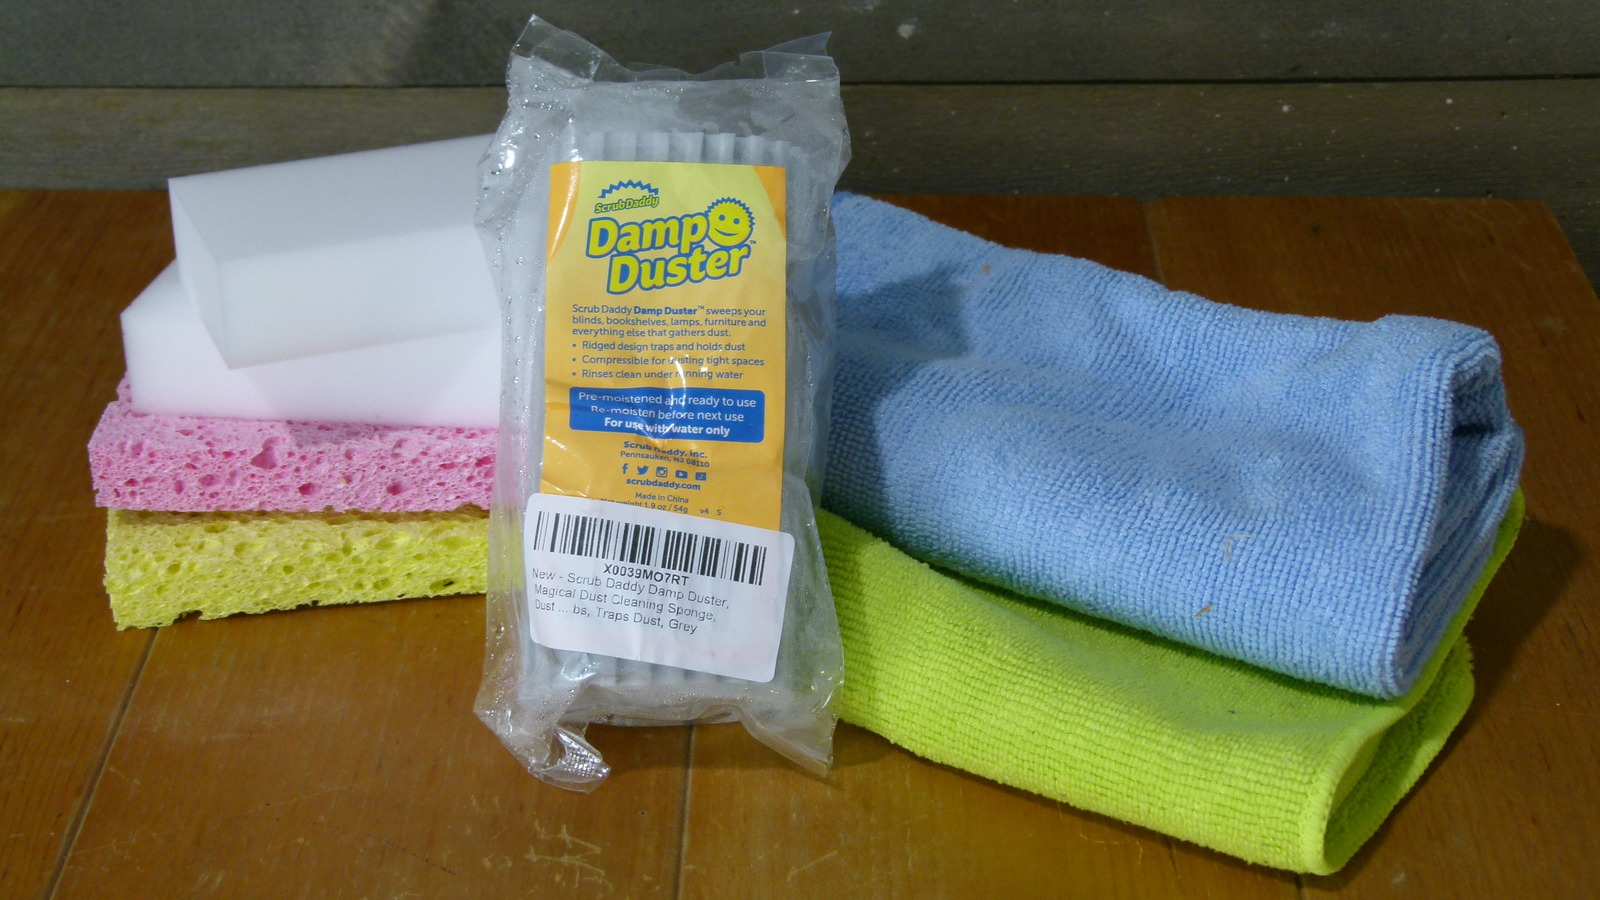 https://www.housedigest.com/img/gallery/scrubdaddy-damp-duster-does-this-viral-cleaning-tool-really-deliver/l-intro-1675865390.jpg